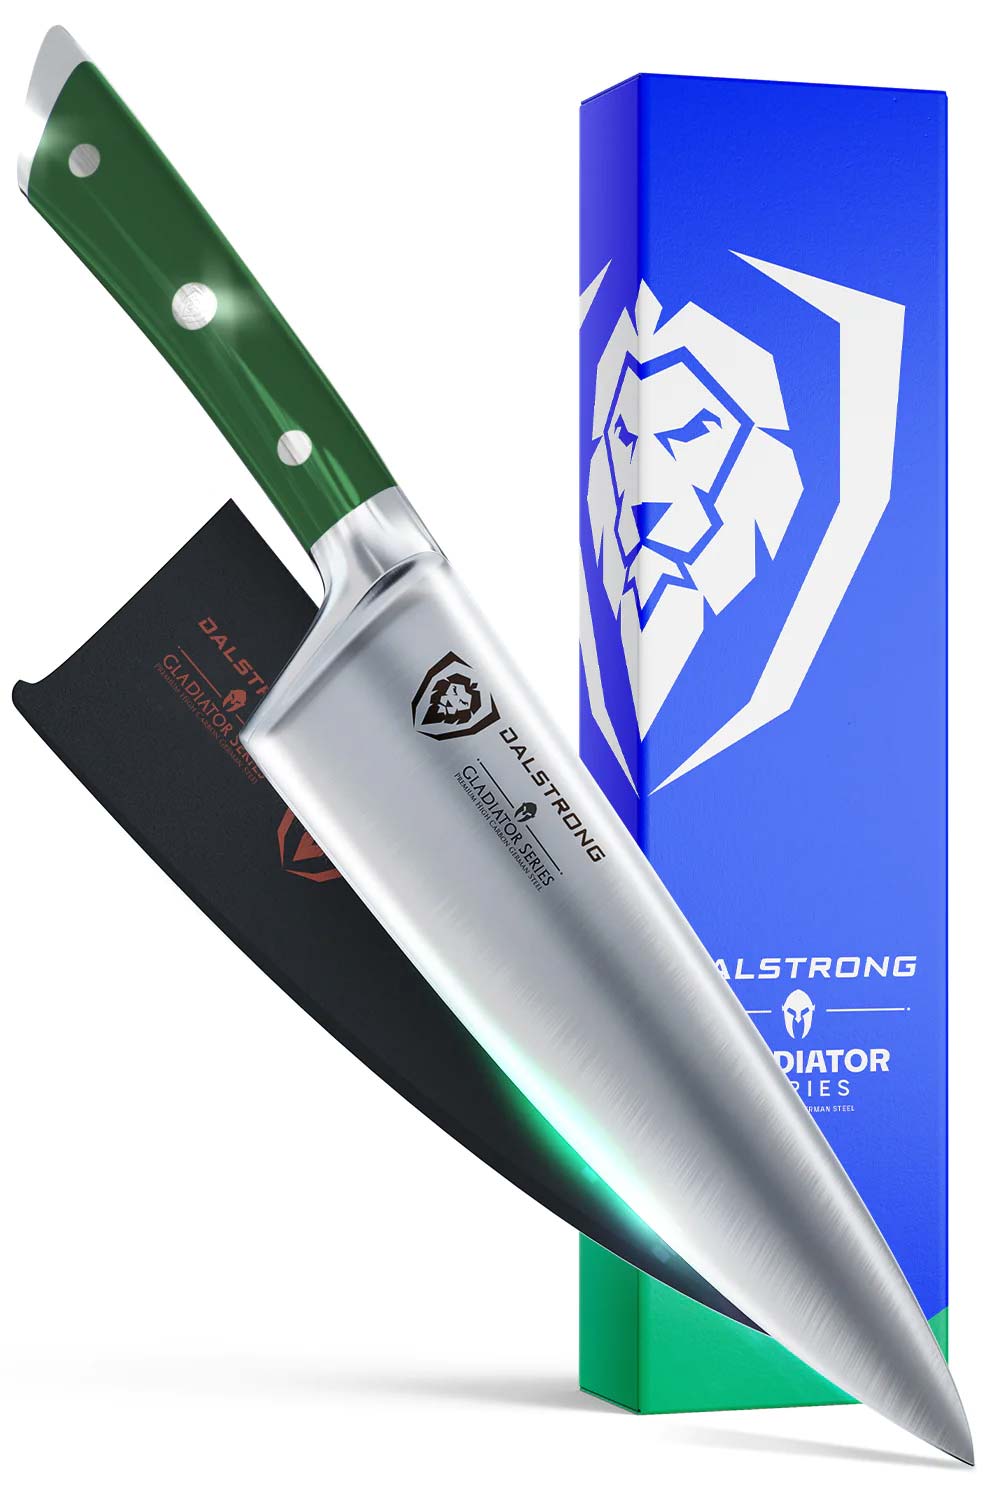 Dalstrong gladiator series 8 inch chef knife with green handl in front of it's premium packaging.